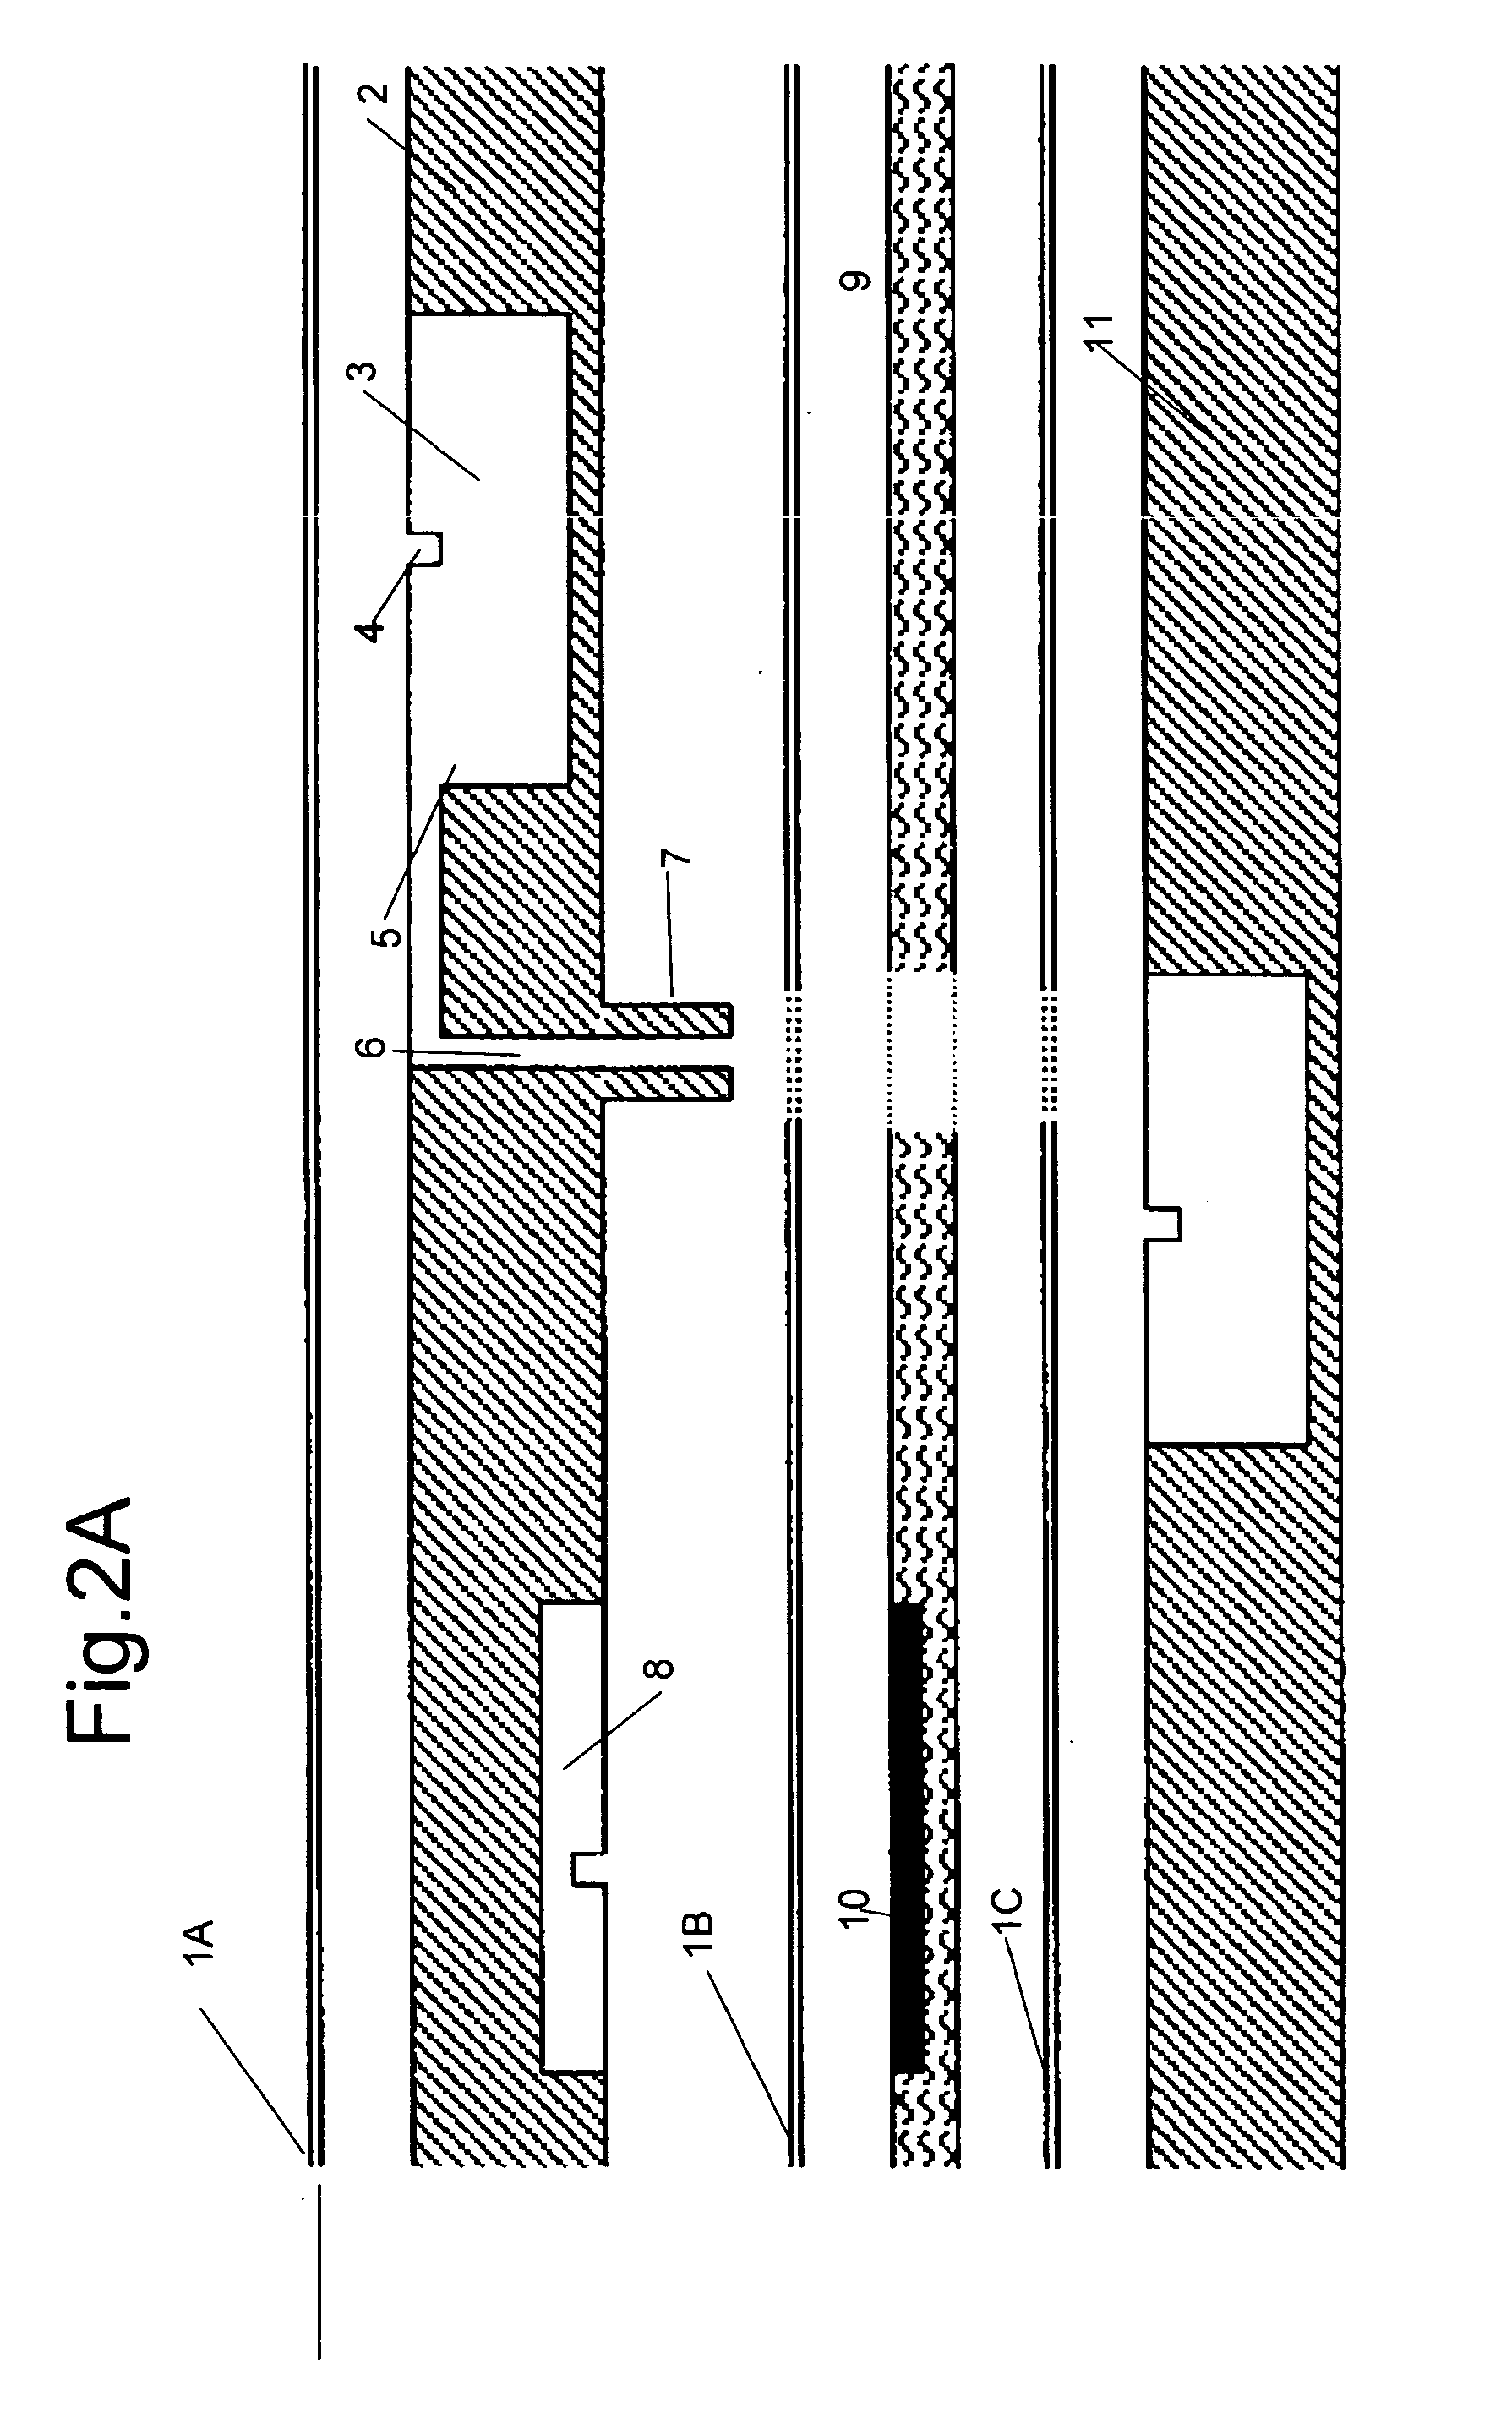 Method and apparatus for controlling fluid movement in a microfluidic system